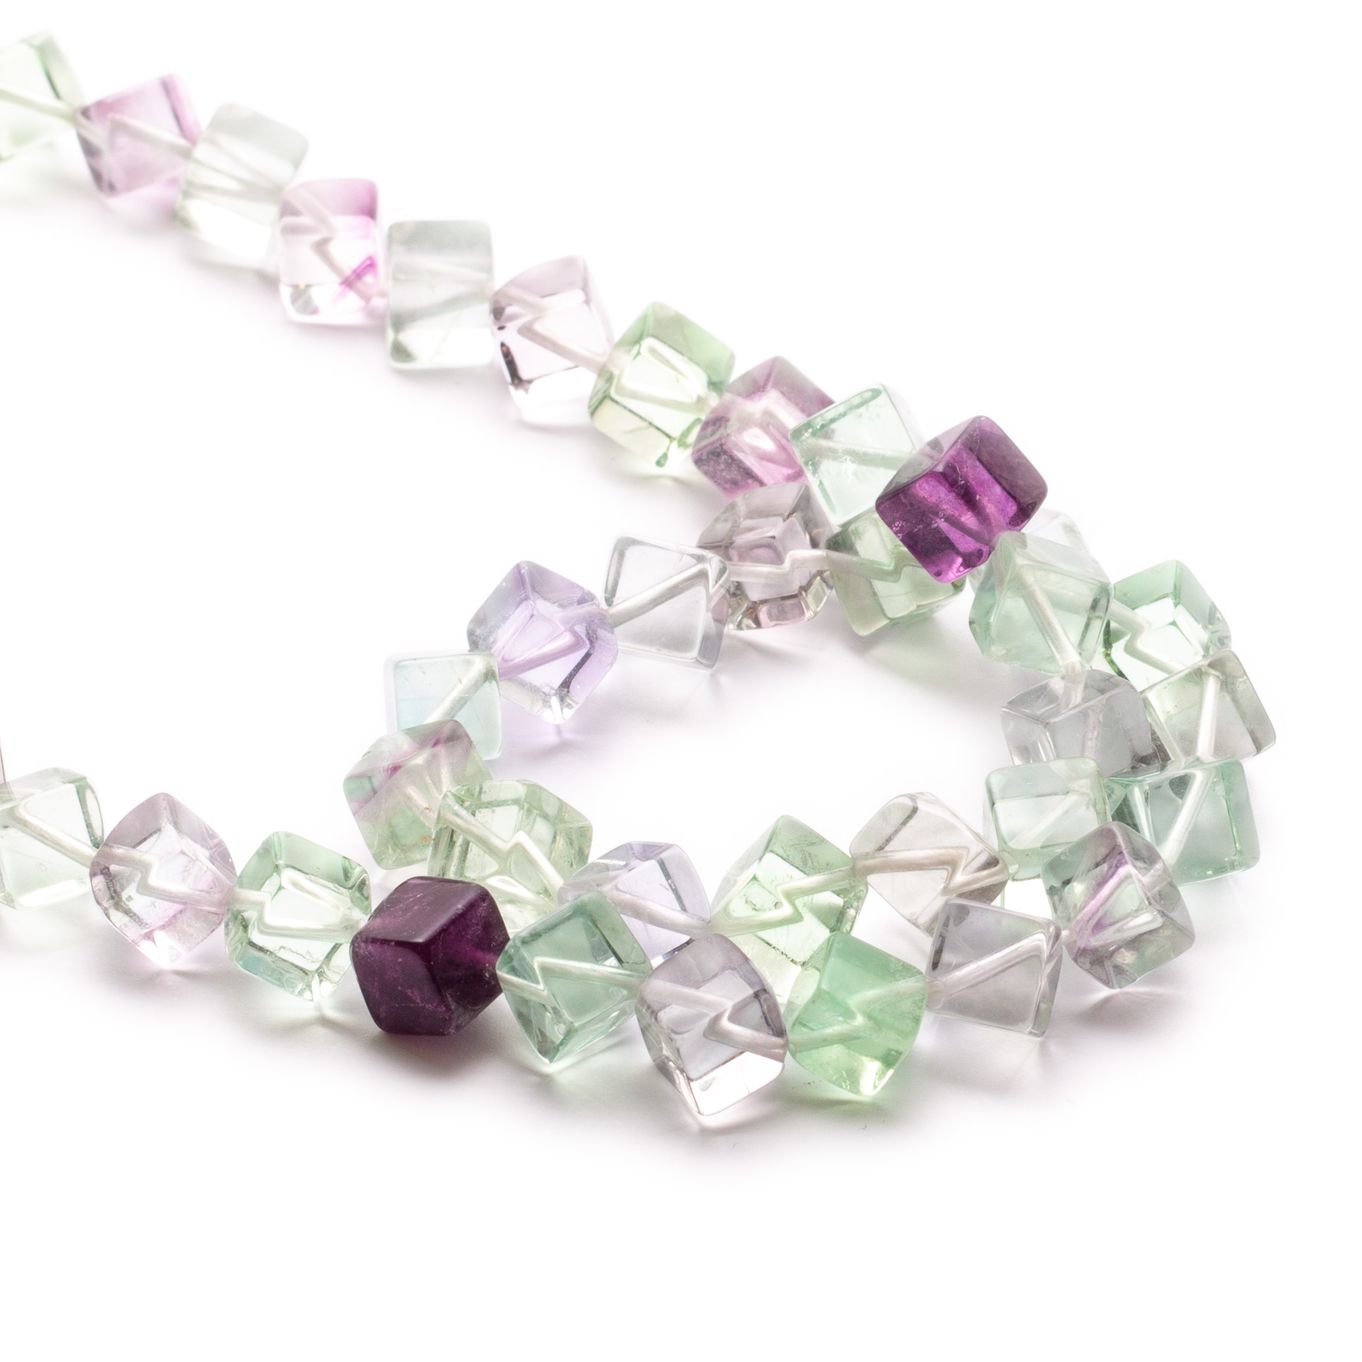 Rainbow Fluorite Cube Beads - Approx From 6mm